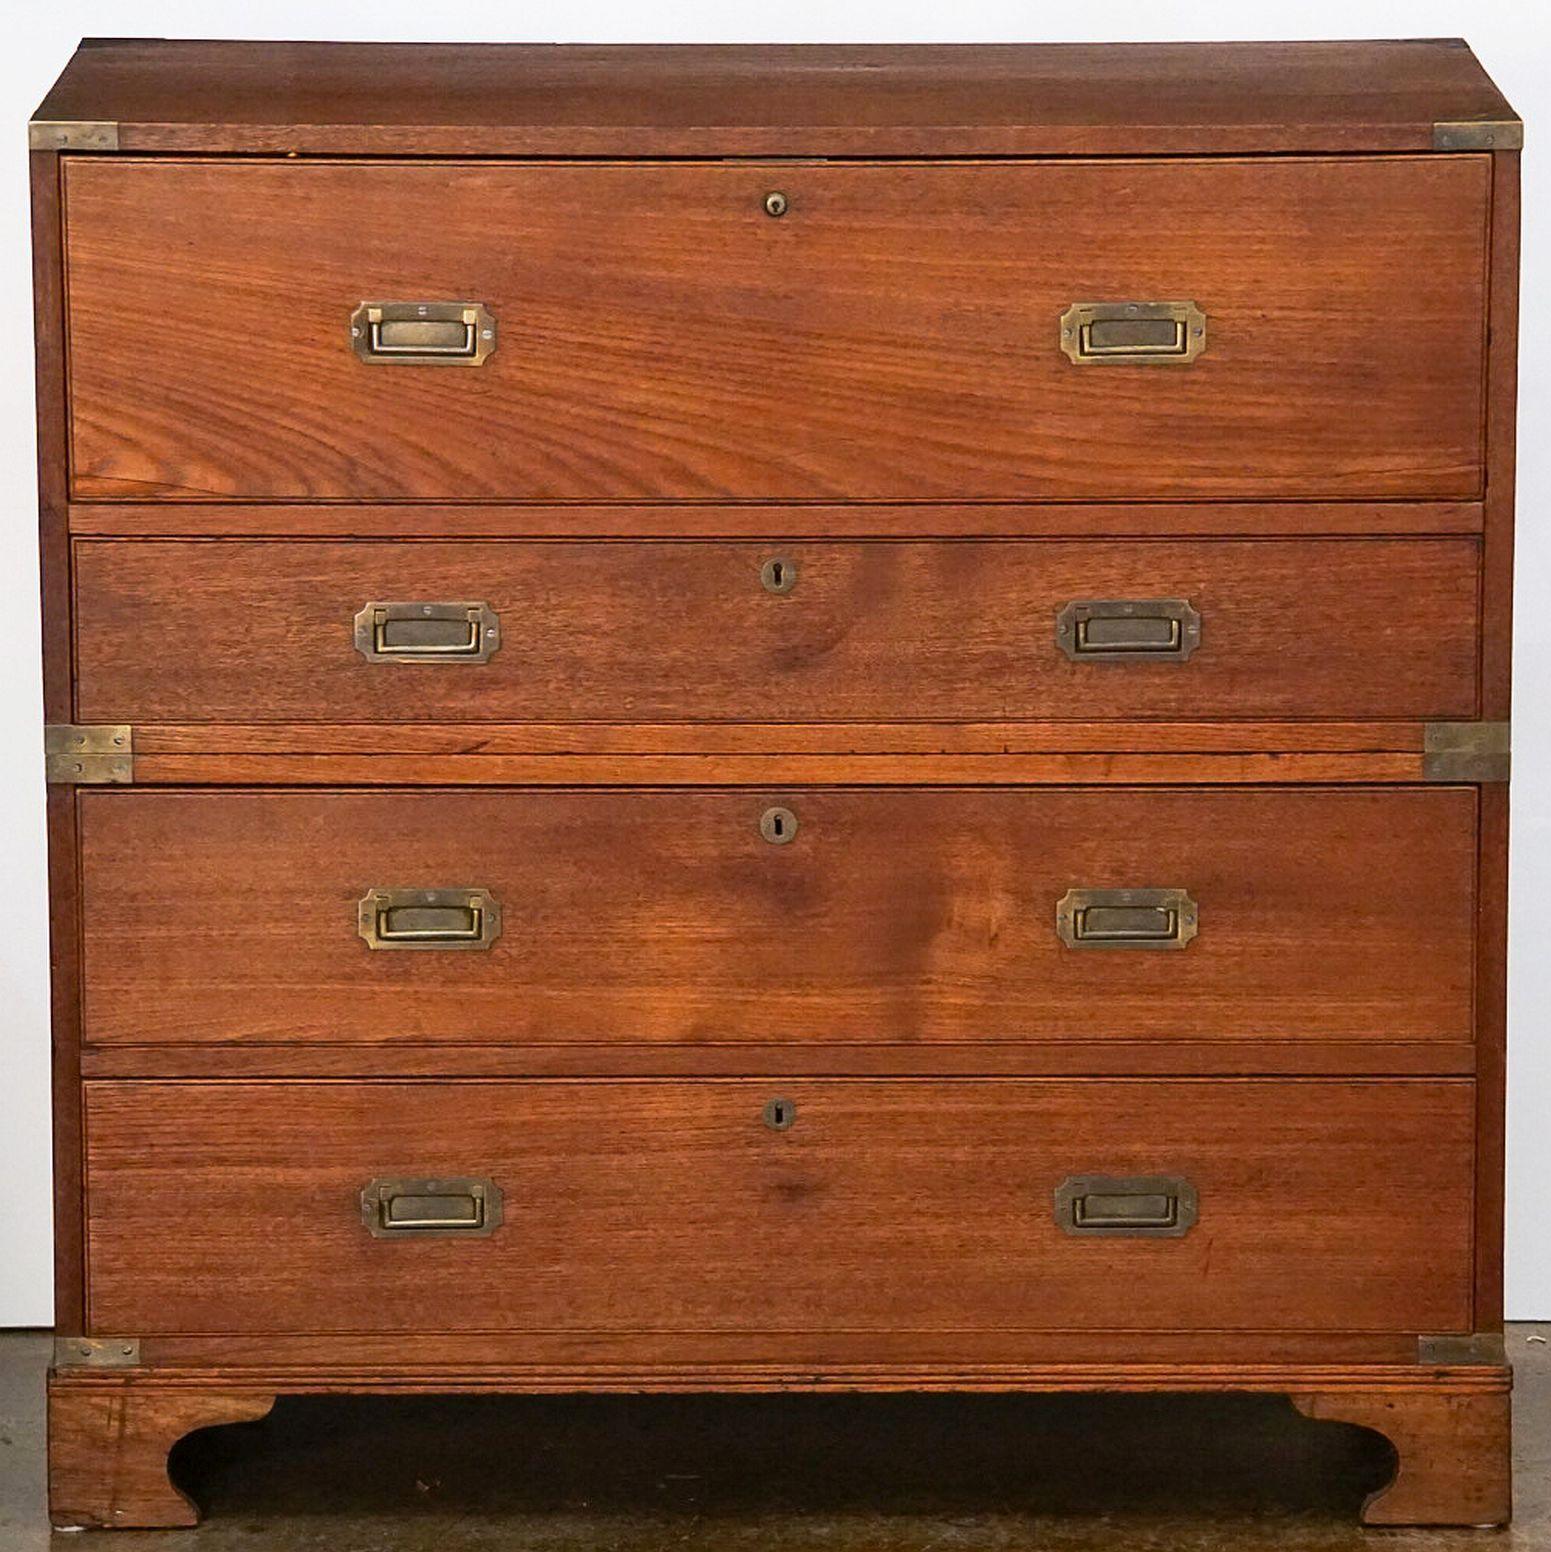 A fine British military officer’s Campaign ware secretary or secretaire, fashioned as a chest of drawers, featuring a teak exterior, showing four long drawers. The top drawer opening to a secretary desk with small drawers and compartments and a